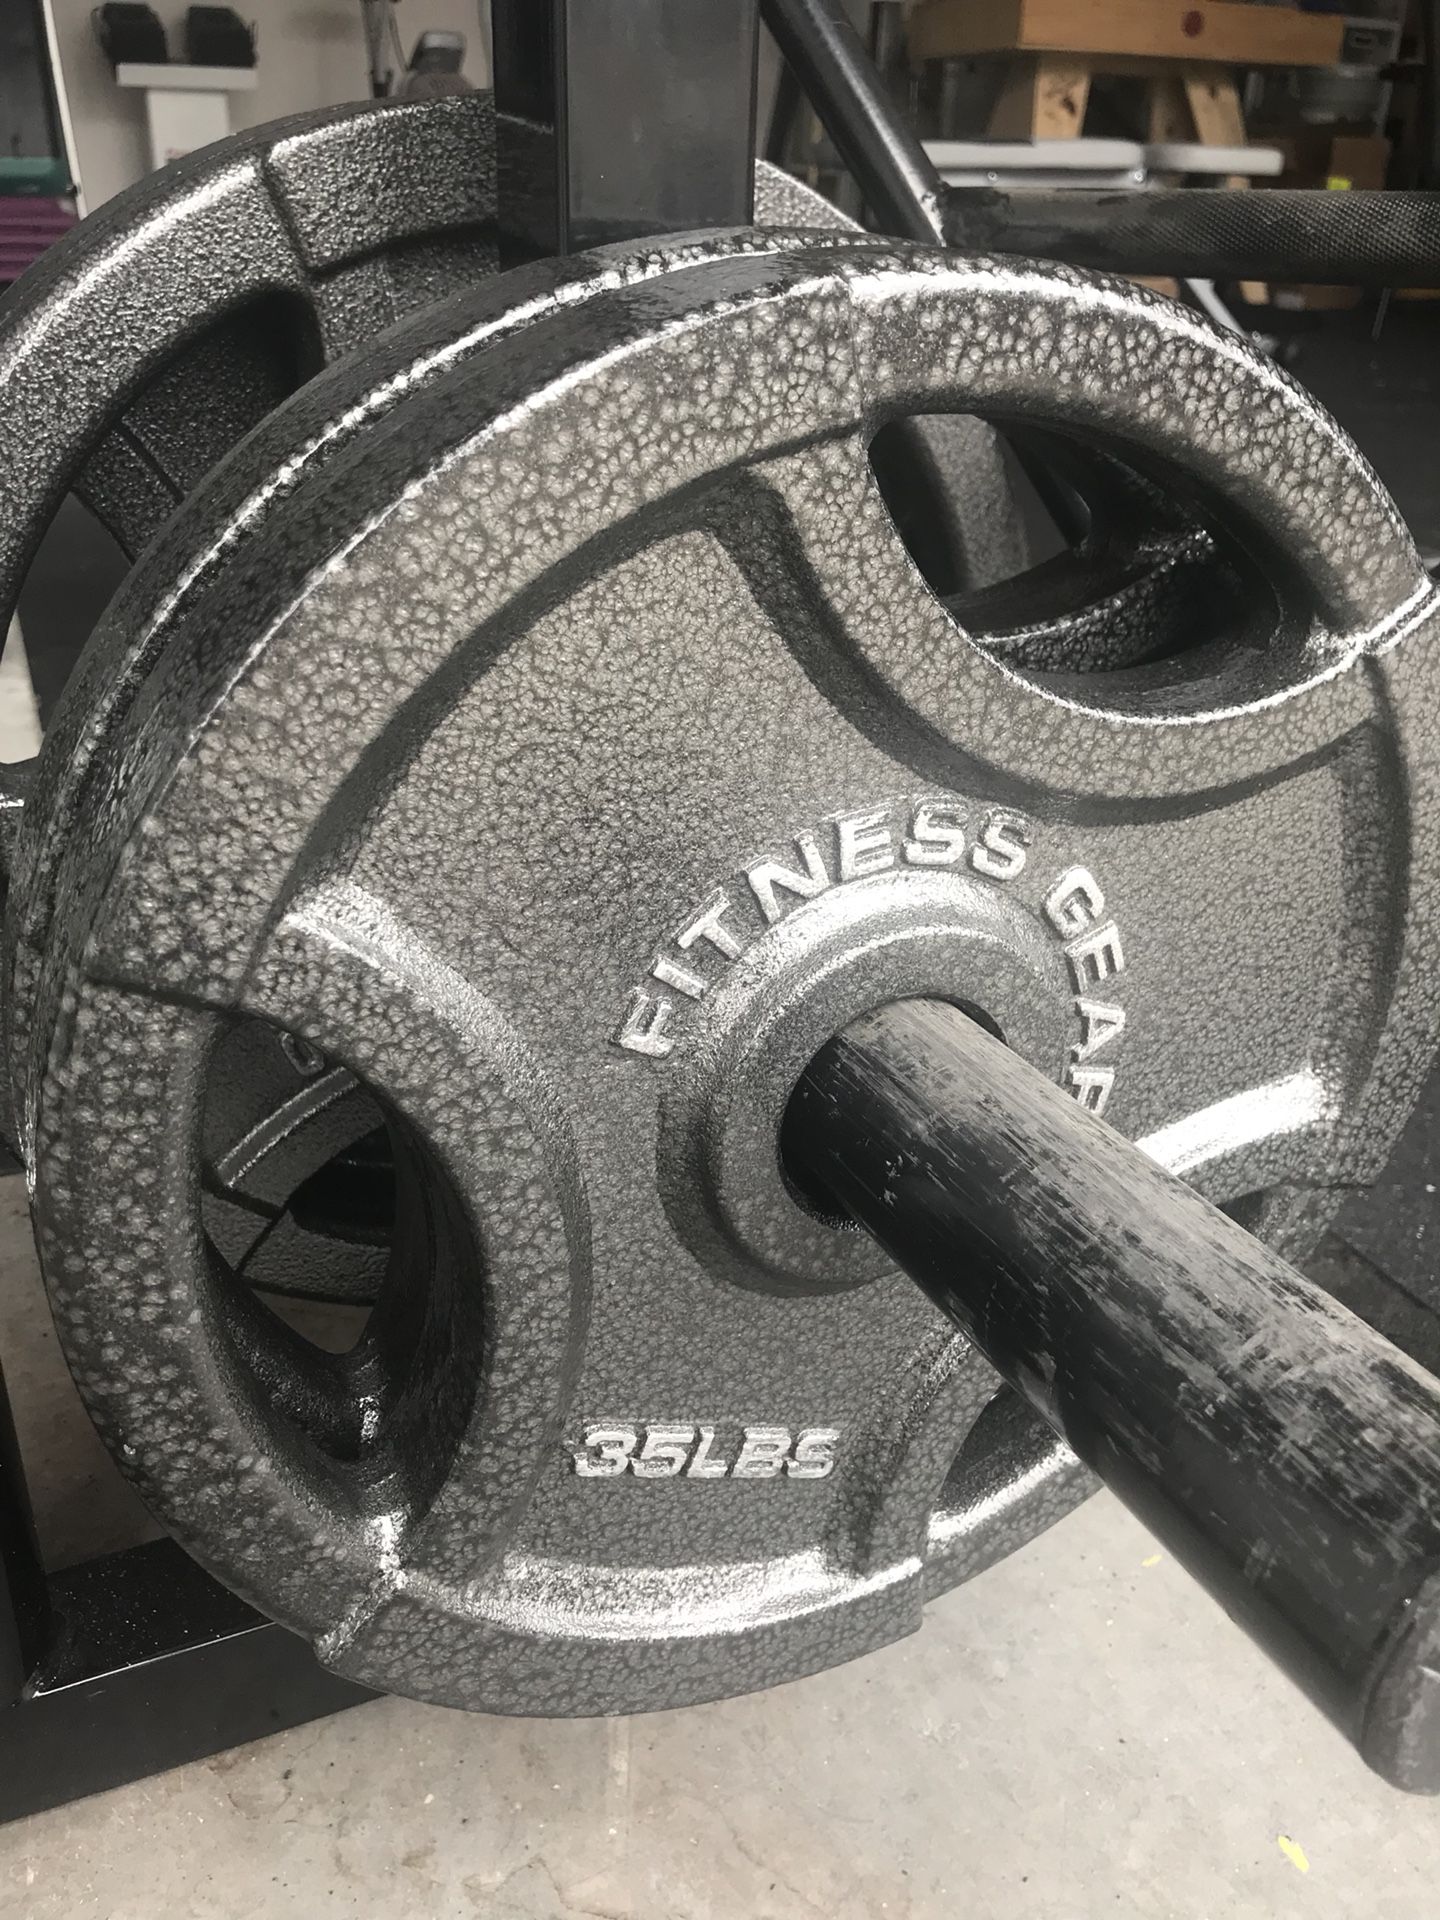 35 lbs free weights